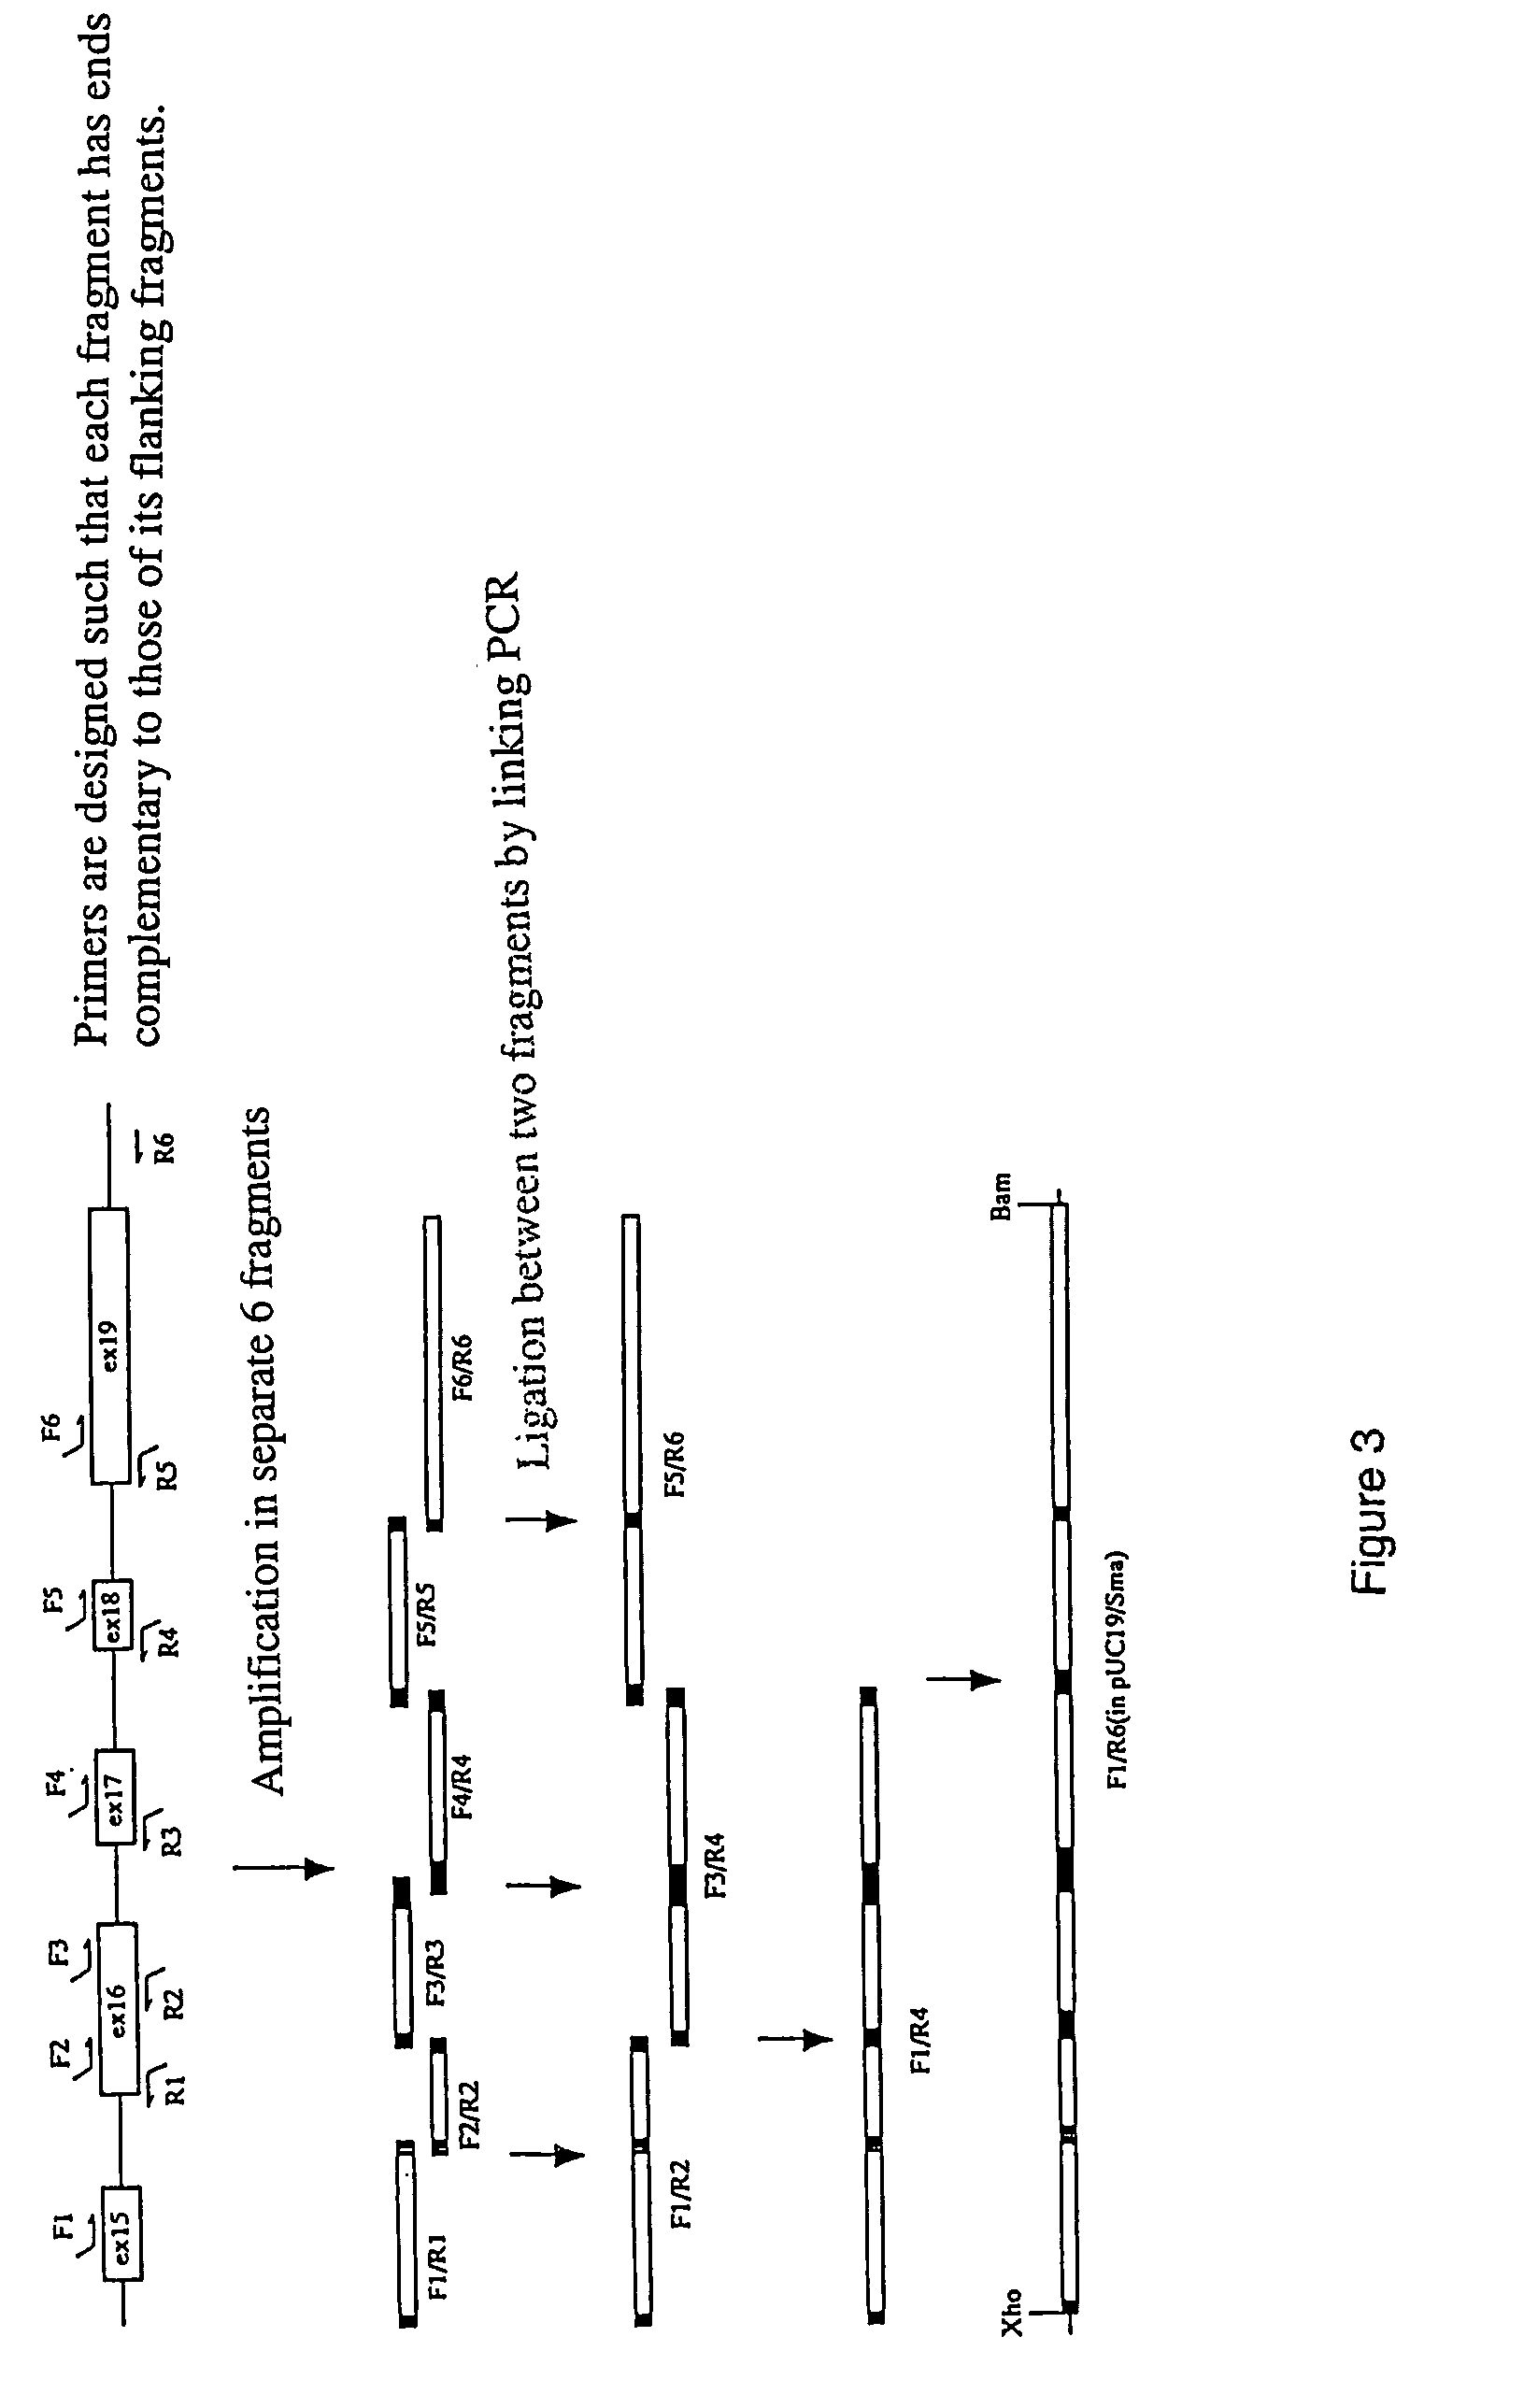 Method of elevating photosynthesis speed of plant by improving pyruvate phosphate dikinase